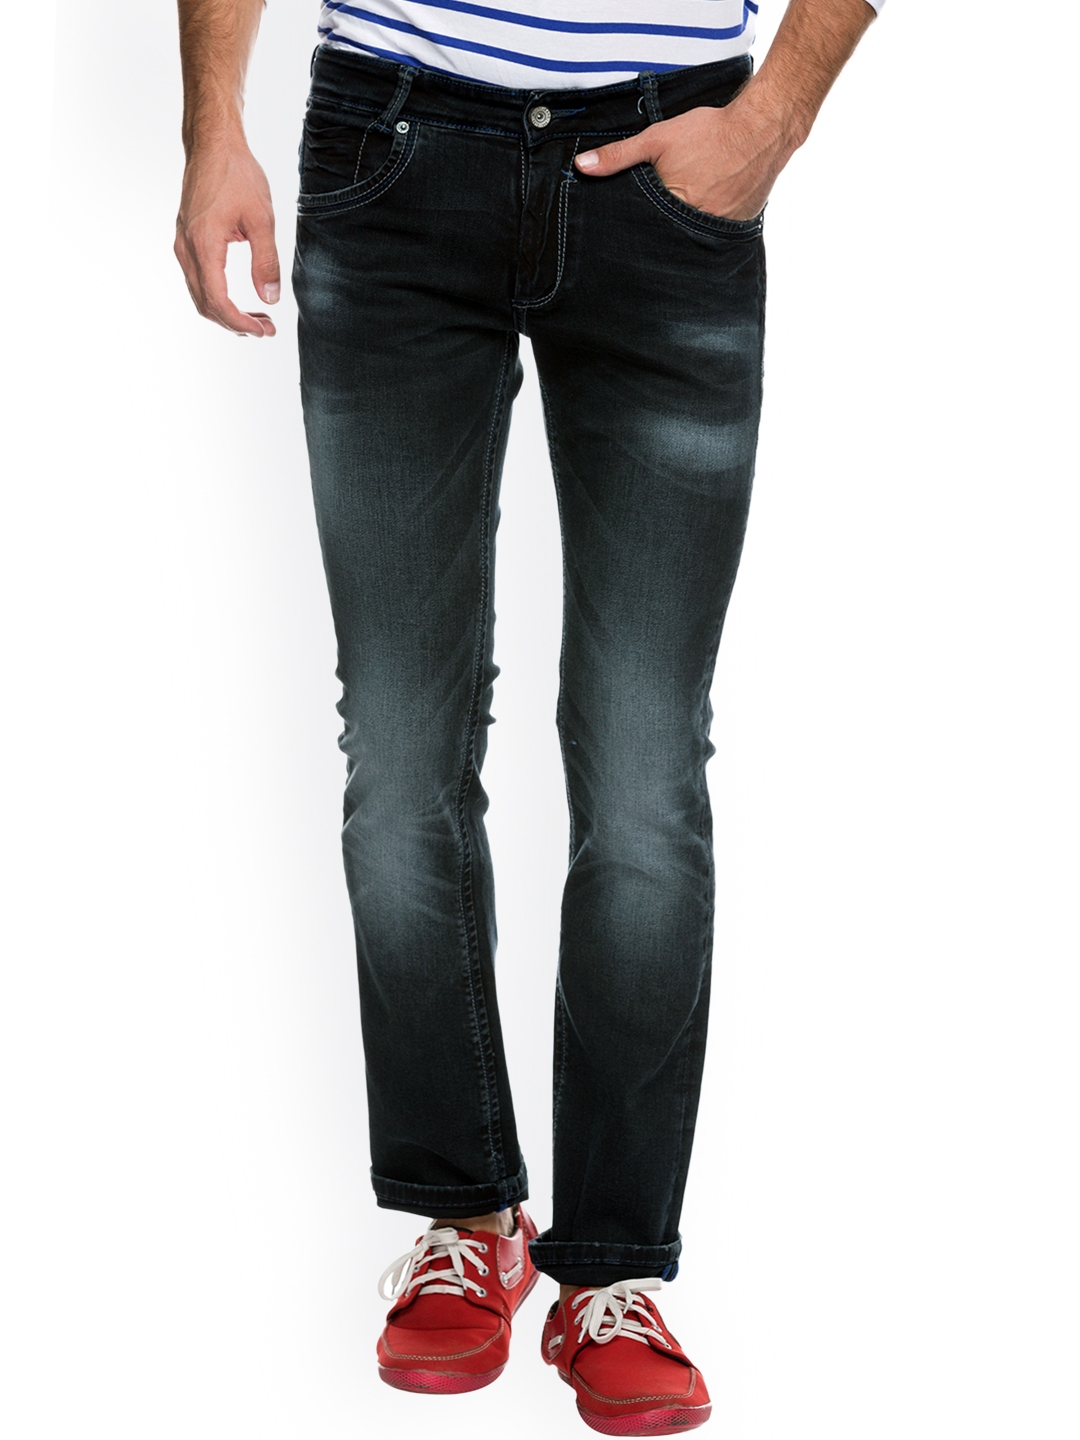 mufti bootcut jeans mens